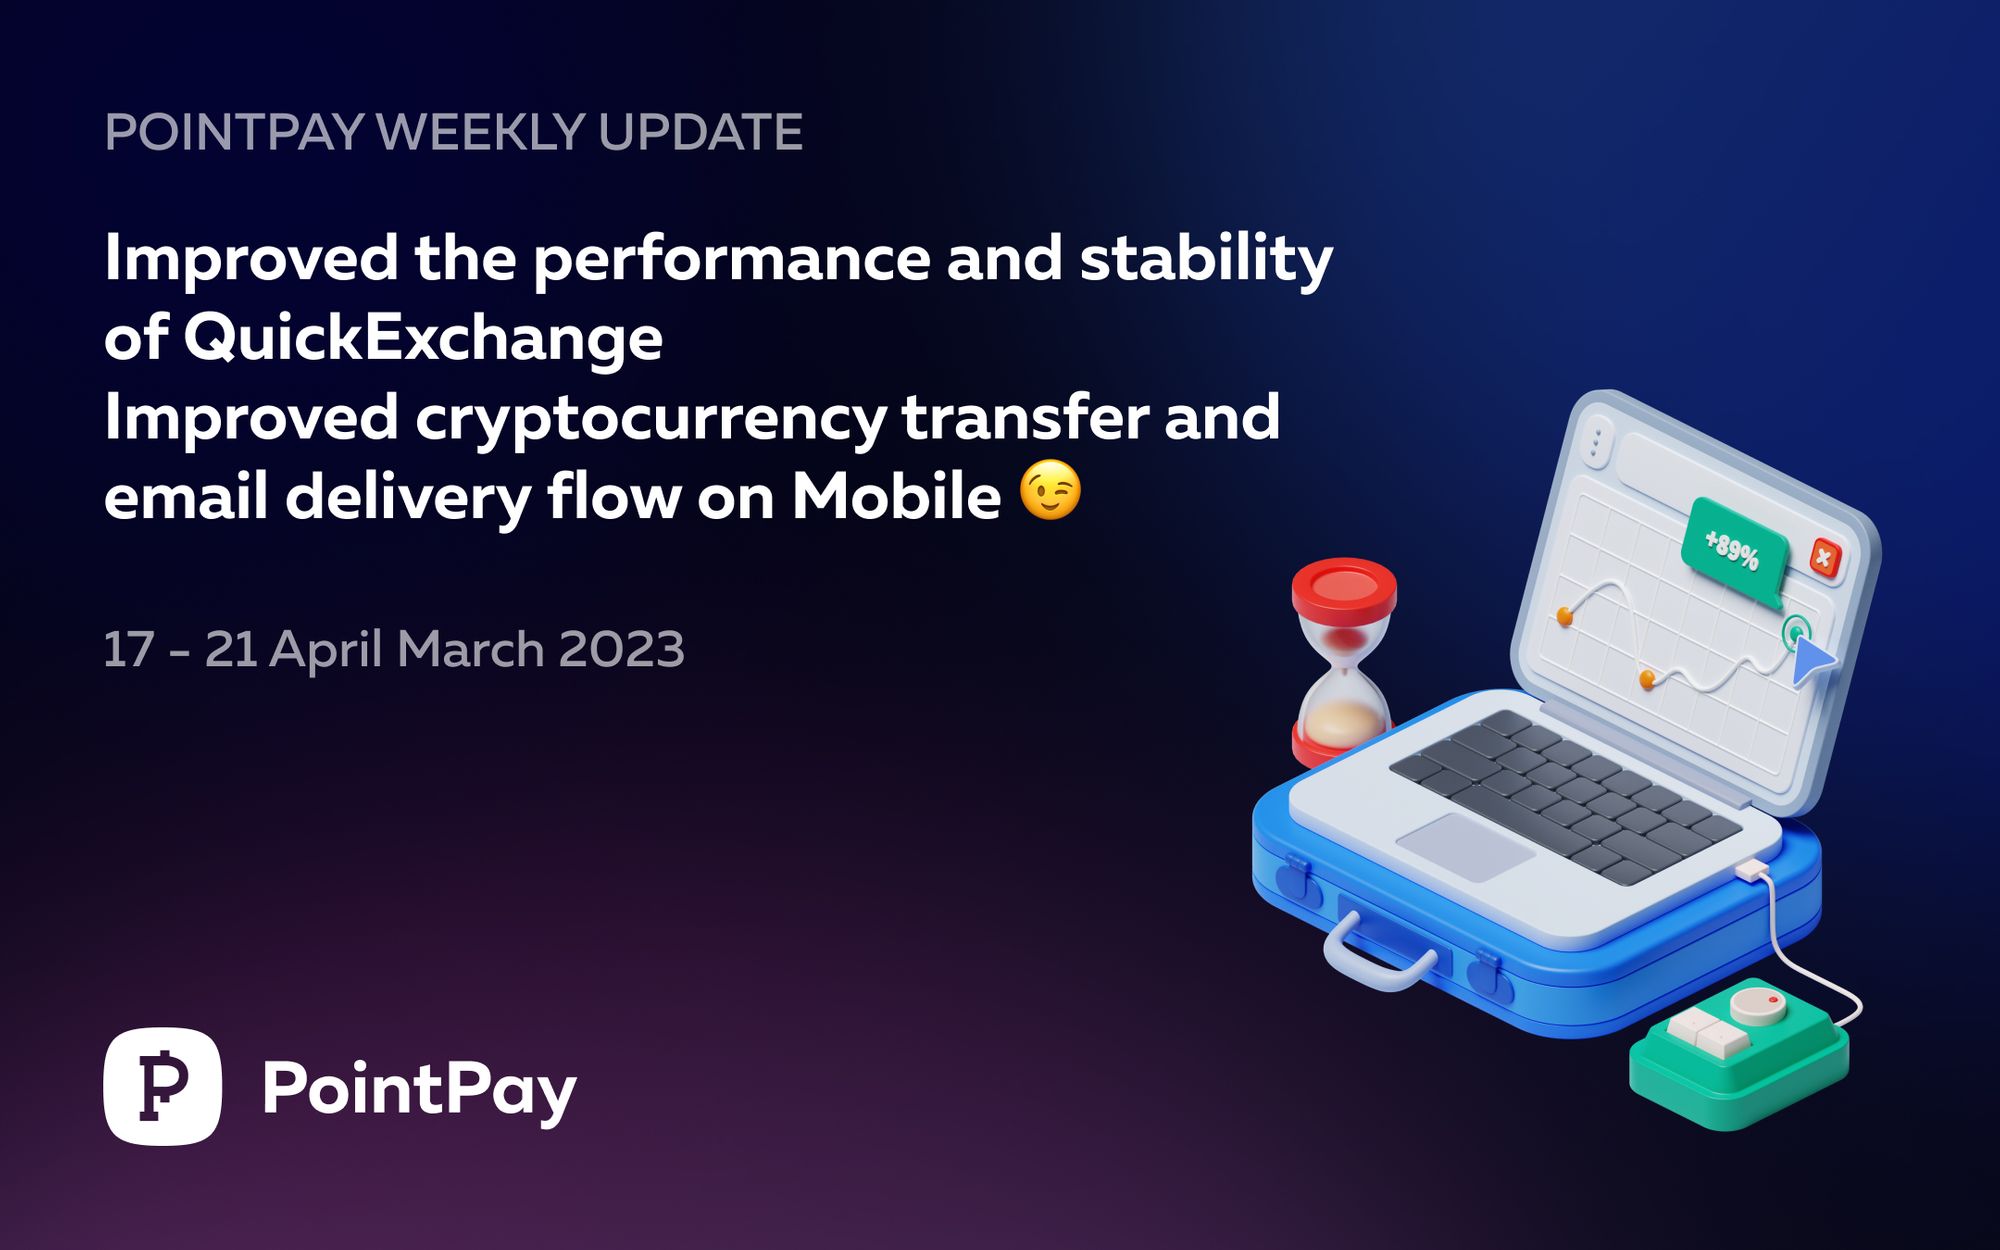 PointPay Weekly Update (17 - 21 April 2023)